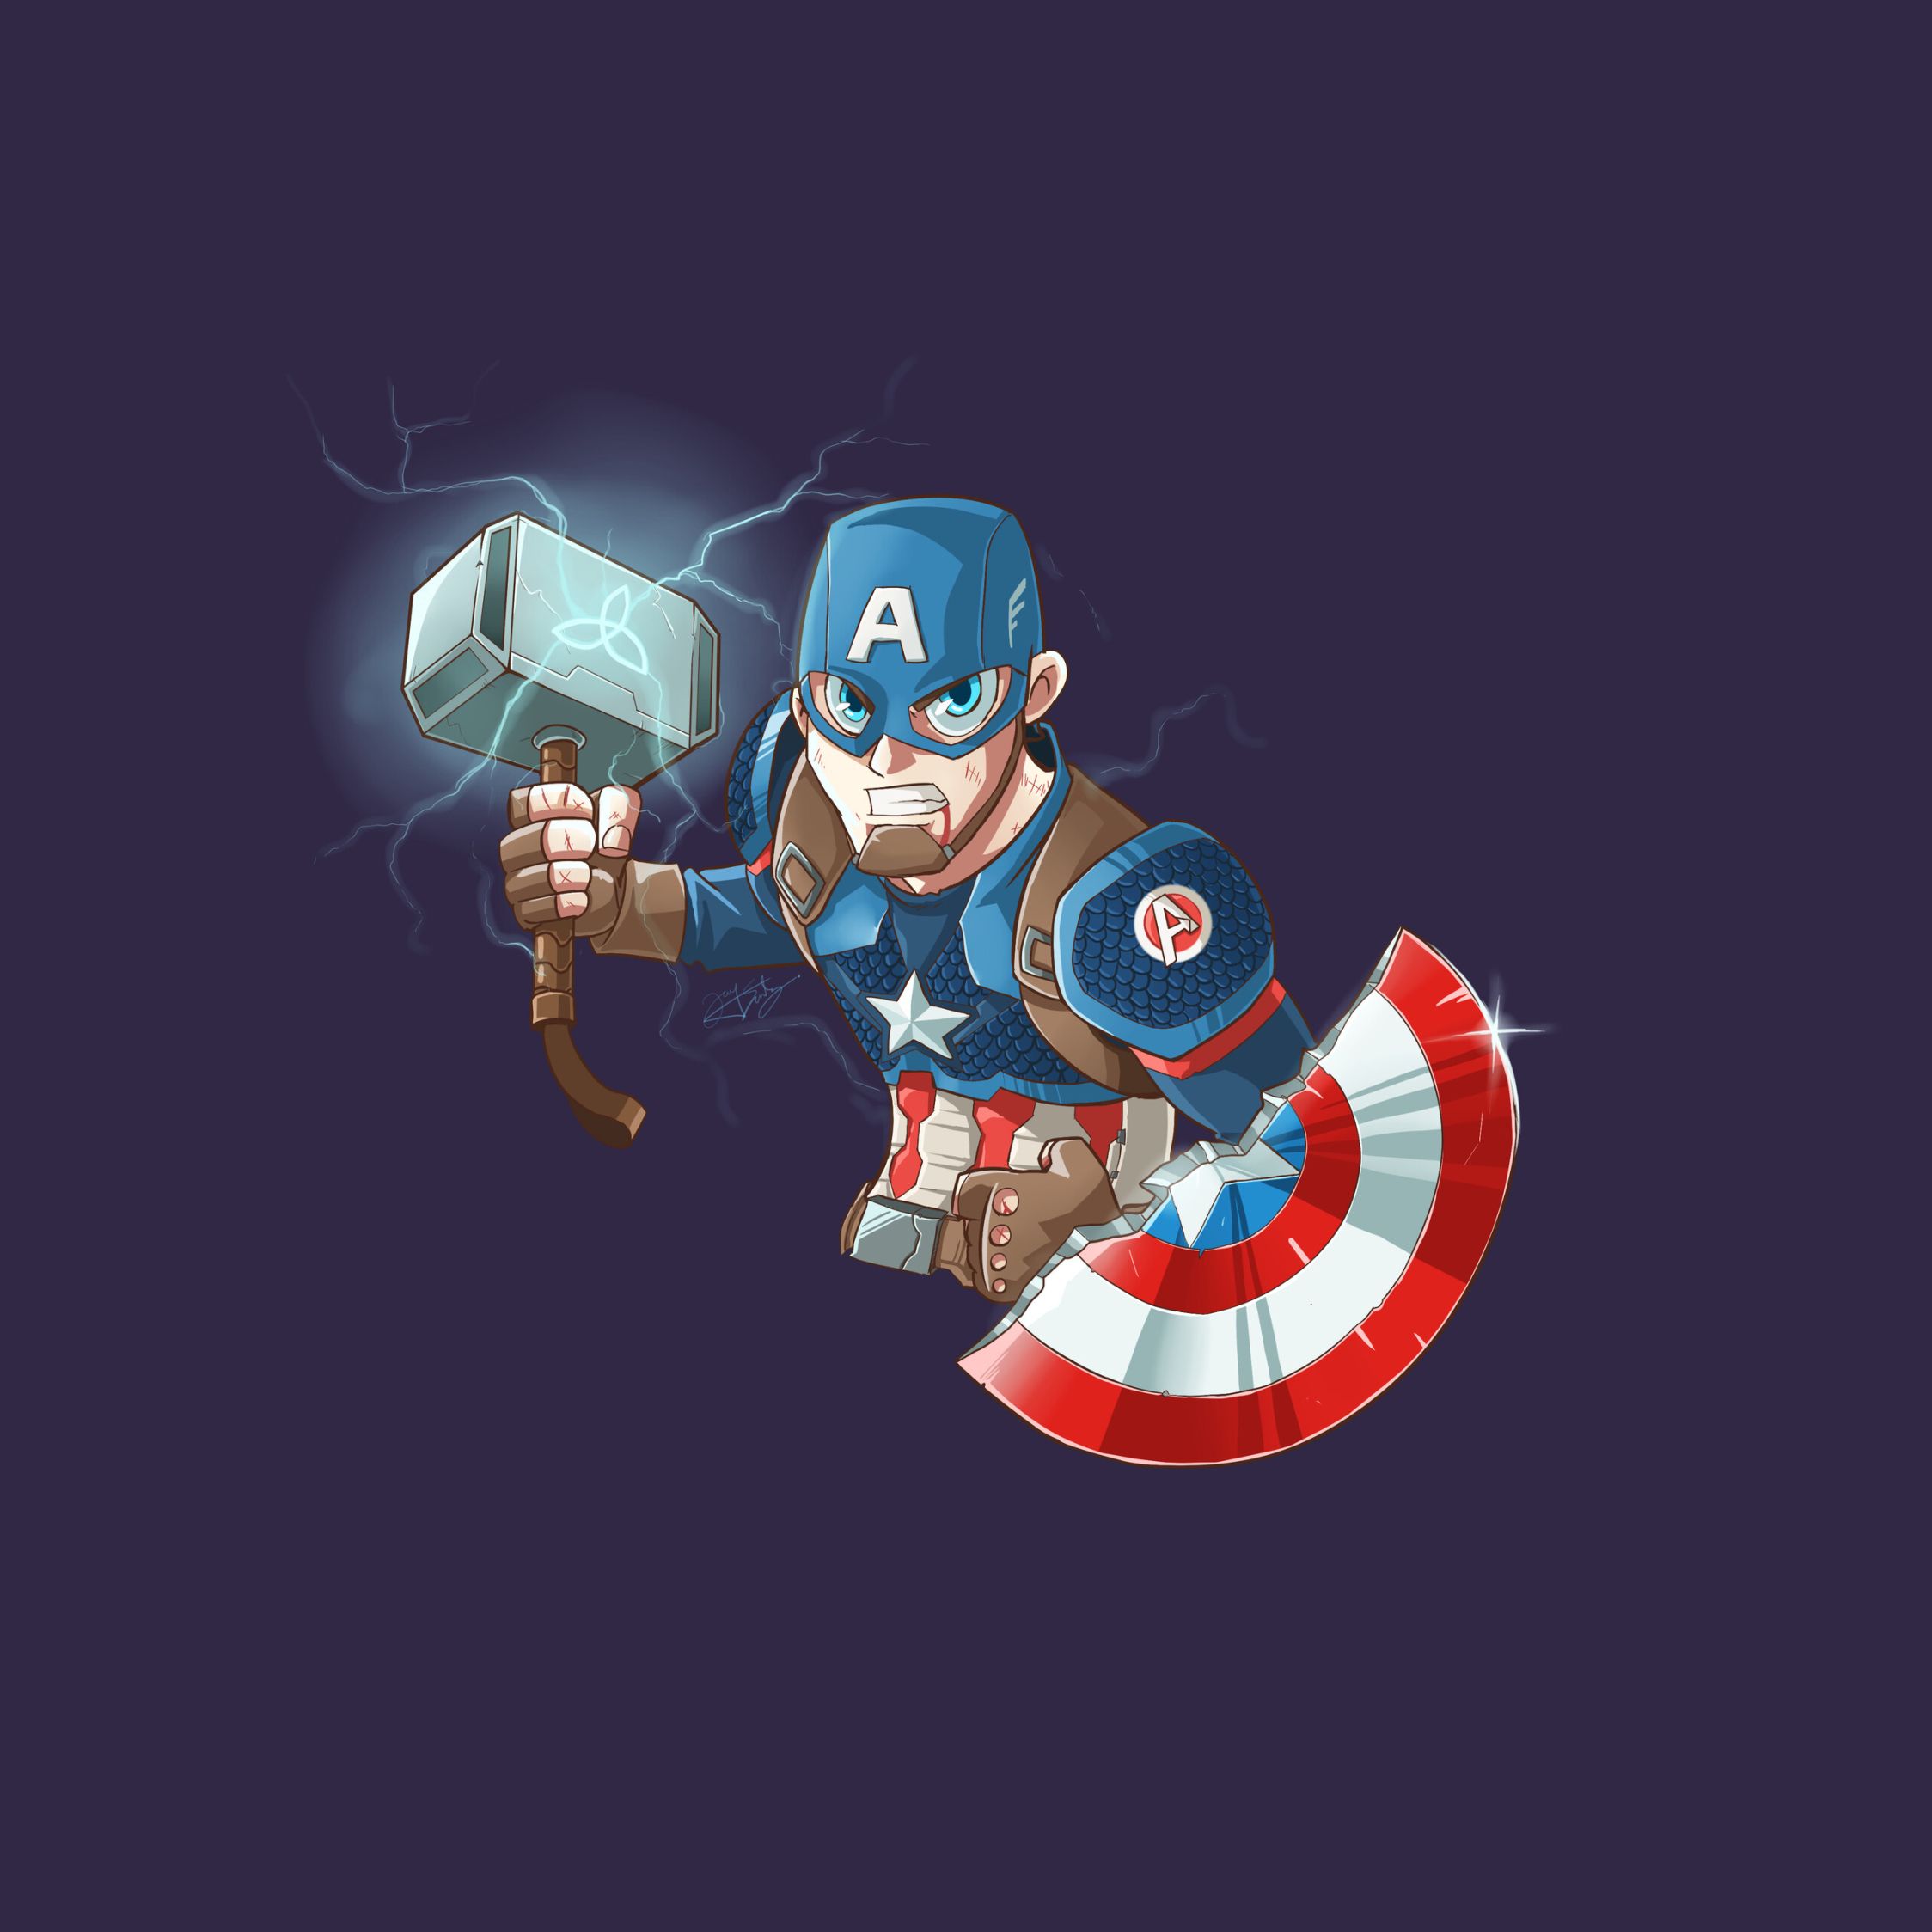 Captain America with Mjolnir and Shield Art 2248x2248 Resolution Wallpaper, HD Artist 4K Wallpaper, Image, Photo and Background